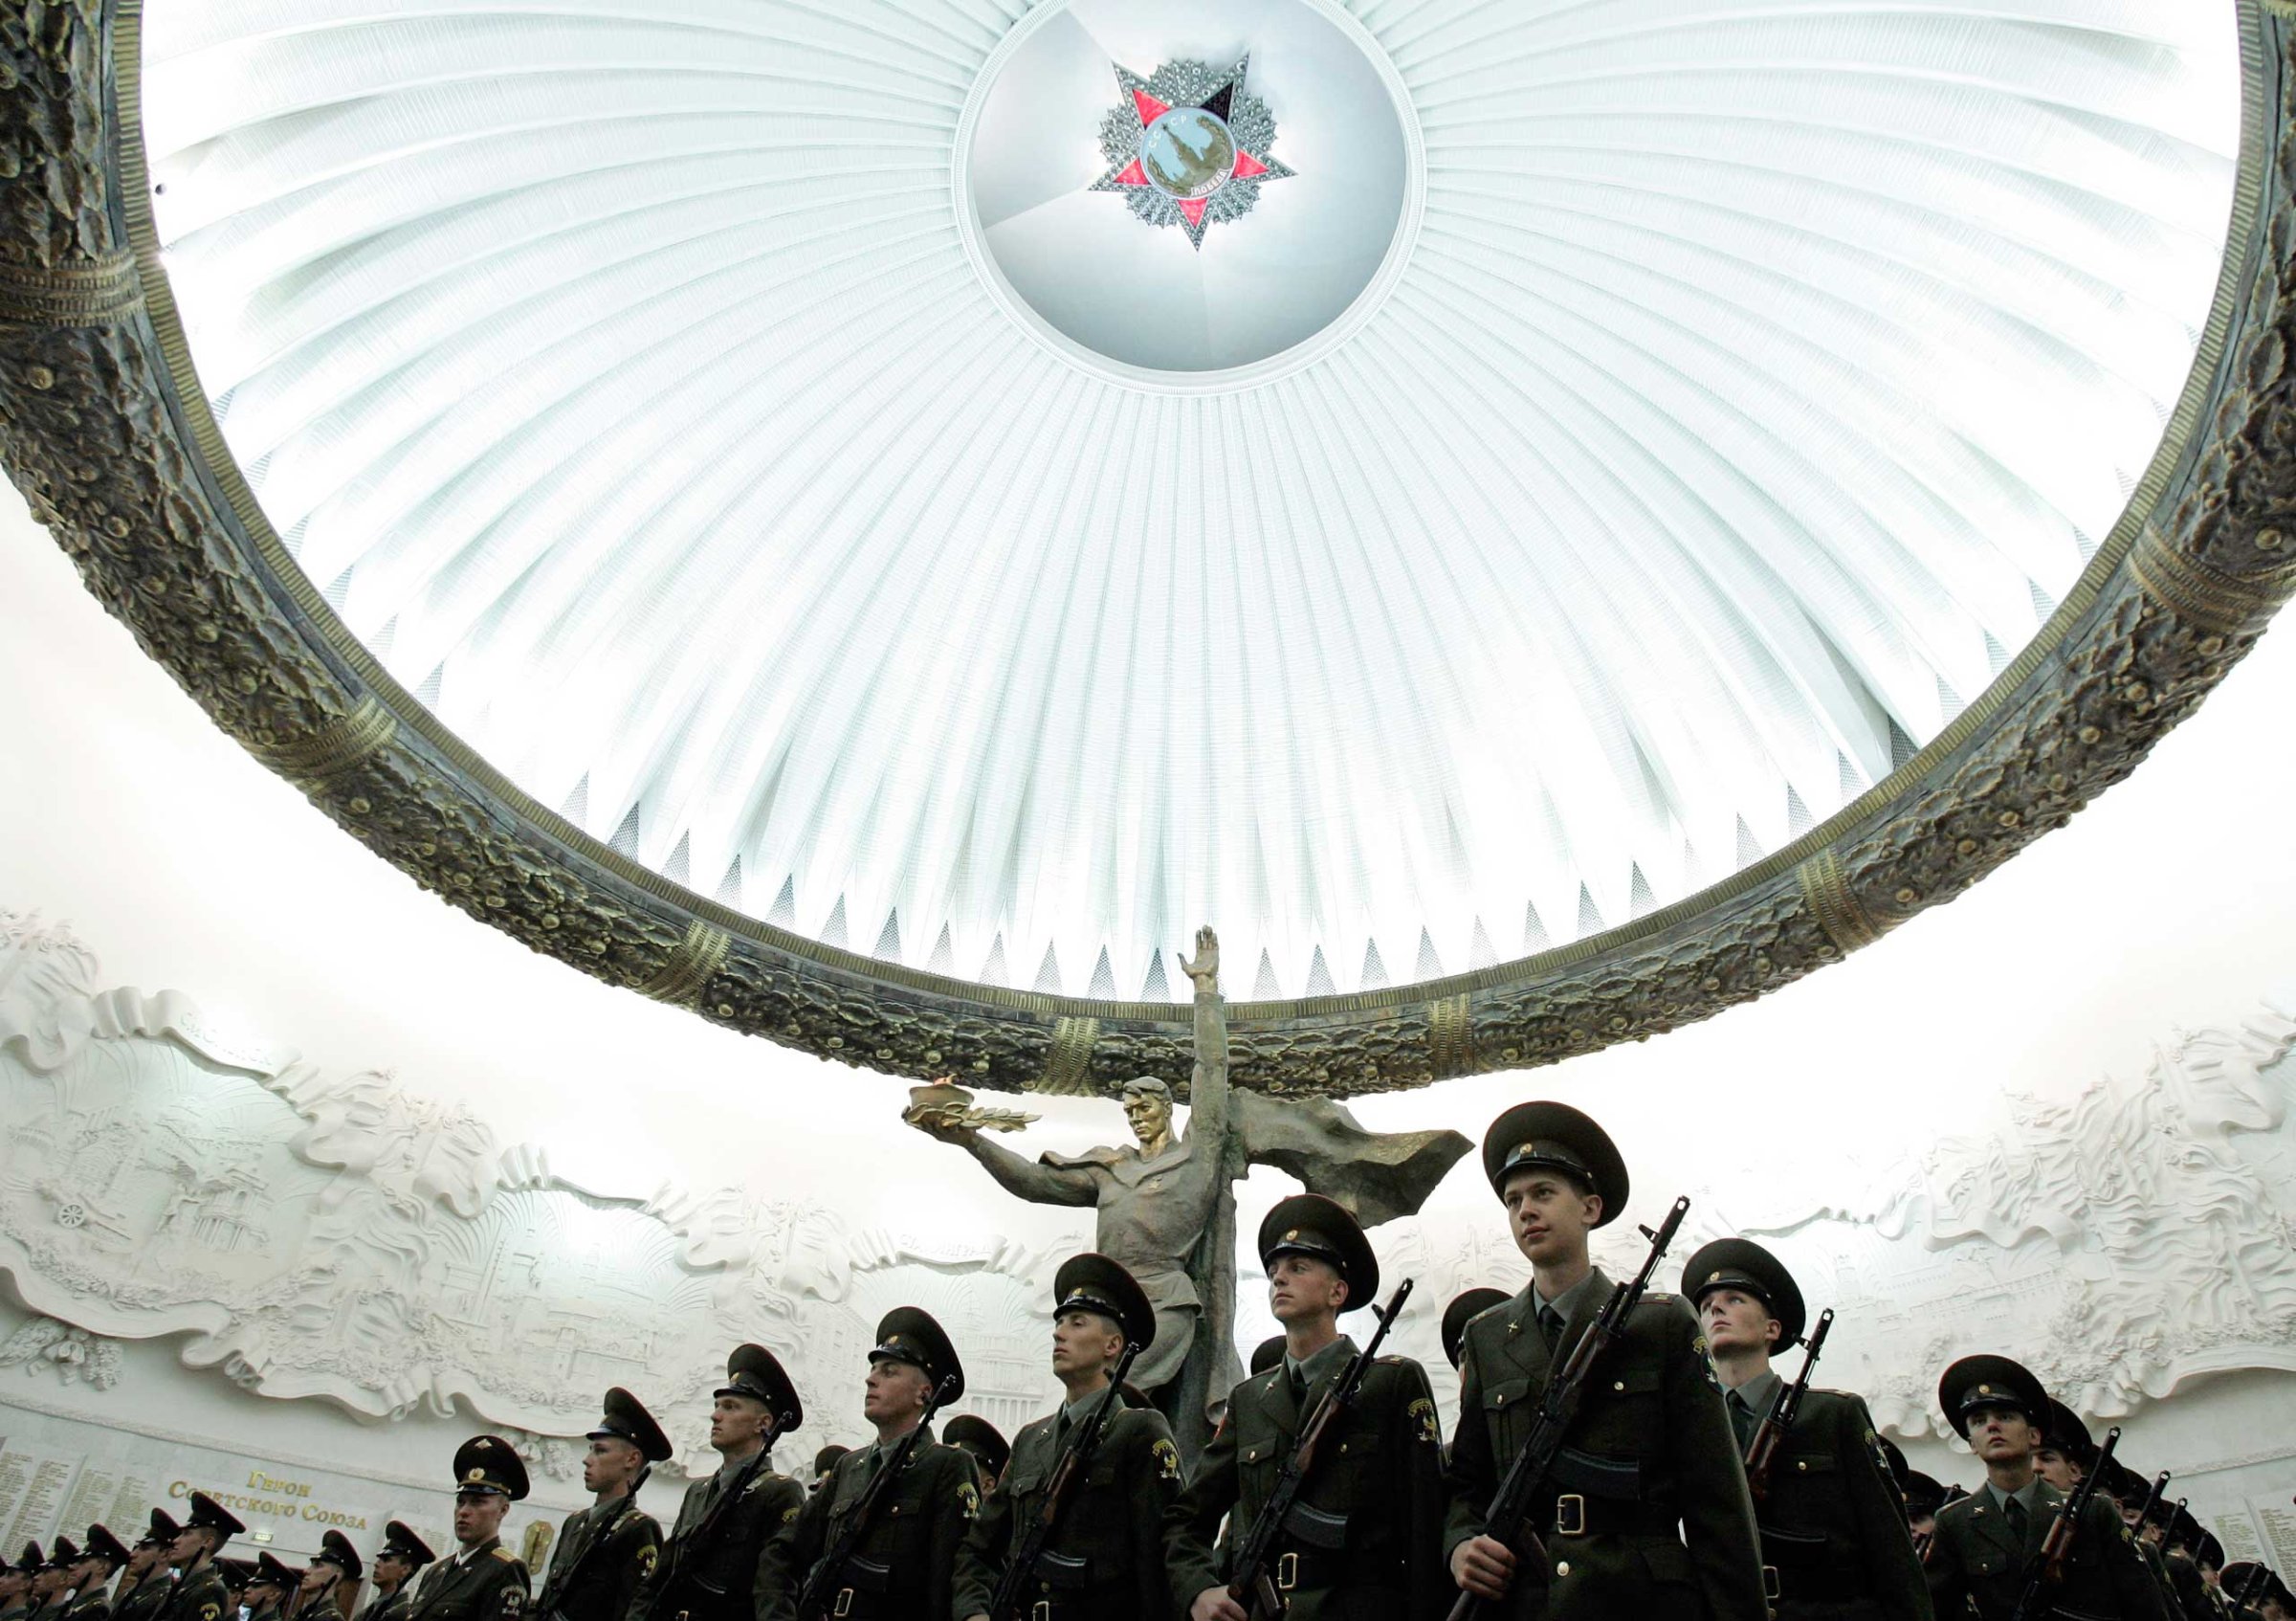 Soldiers stand in formation as they swear an oath at the World War Two museum on Poklonnaya Gora in Victory Park, Moscow in 2007.